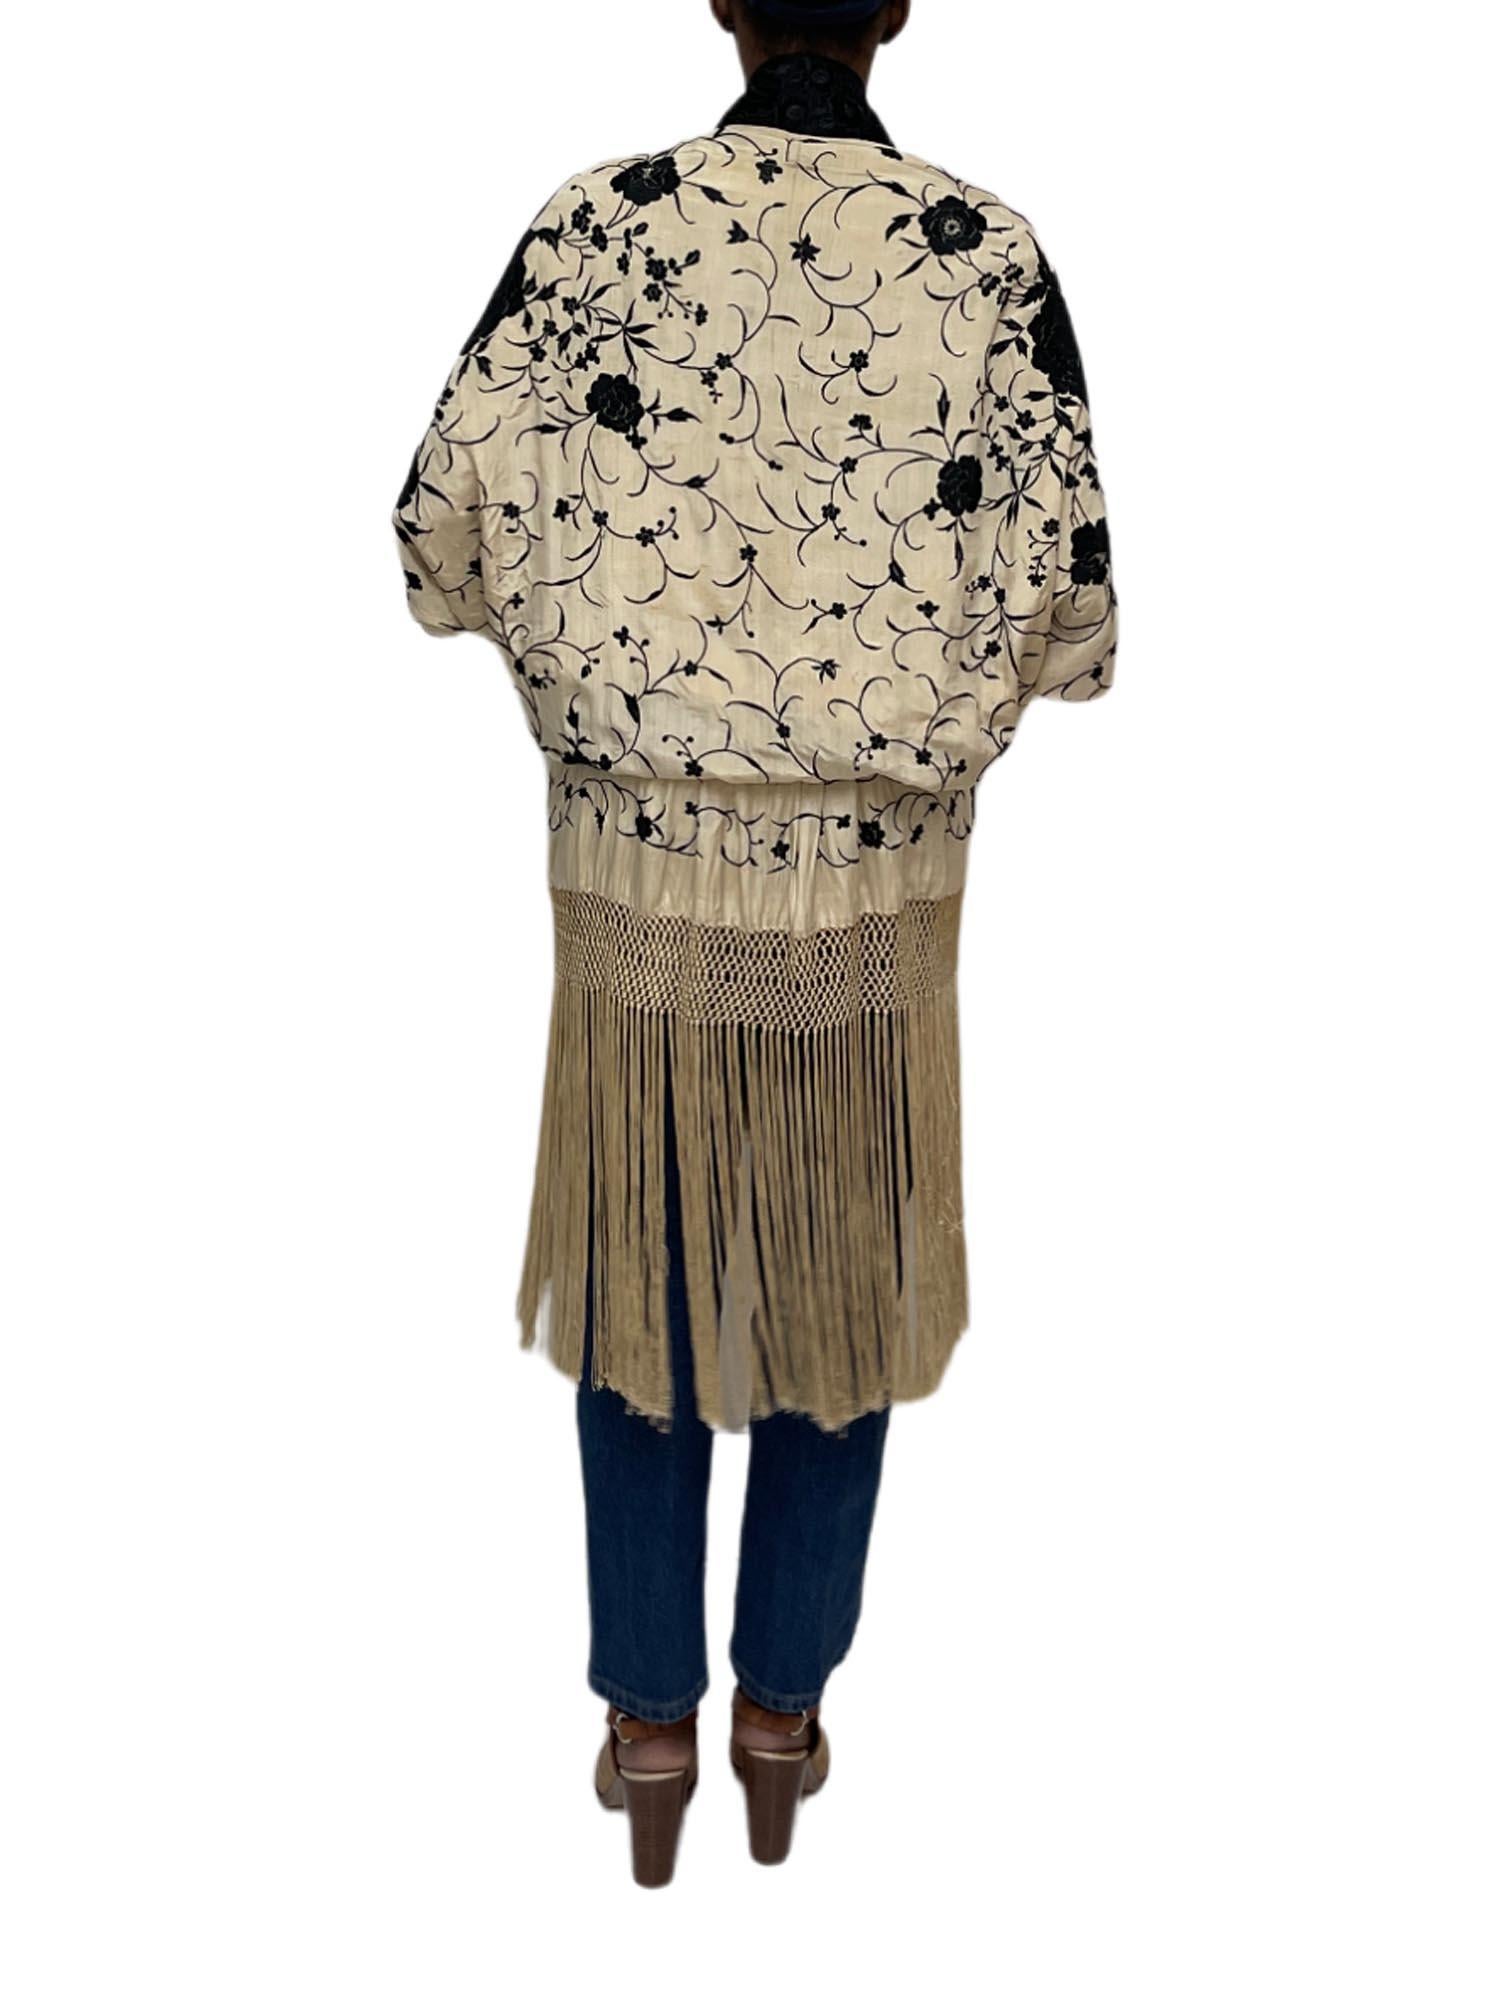 MORPHEW COLLECTION Cream & Black Silk Hand Embroidered Floral Cocoon With Fringe For Sale 3